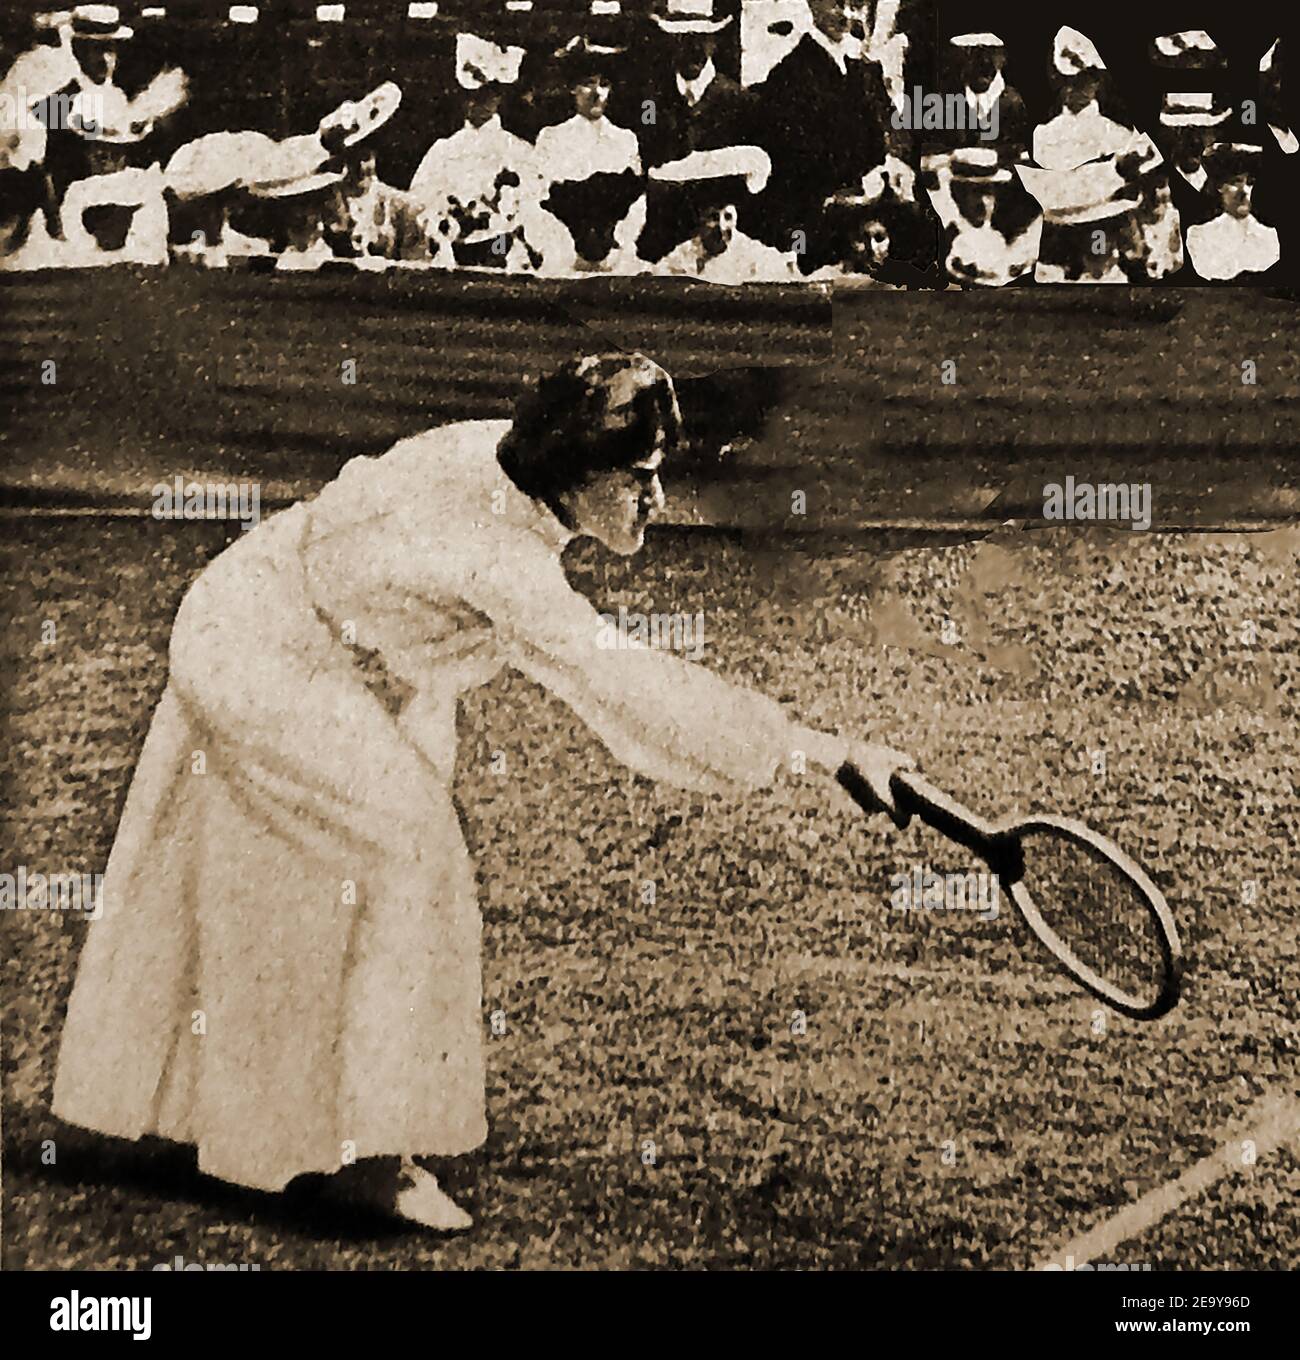 1908 - A press photo of the time showing  'Mrs Lambert Chambers;, Champion Tennis player at Wimbledon.   --- Dorothea Lambert Chambers (née Dorothea Katherine Douglass, 1878 – 1960) was a British tennis player who won 7 Wimbledon Women's Singles titles and a gold medal at the 1908 Summer Olympics. She was the author of 'Tennis for Ladies'. She undertook voluntary  war work during the First World War During the First World War, firstly at Ealing Hospital, and then at the Little Theatre Stock Photo